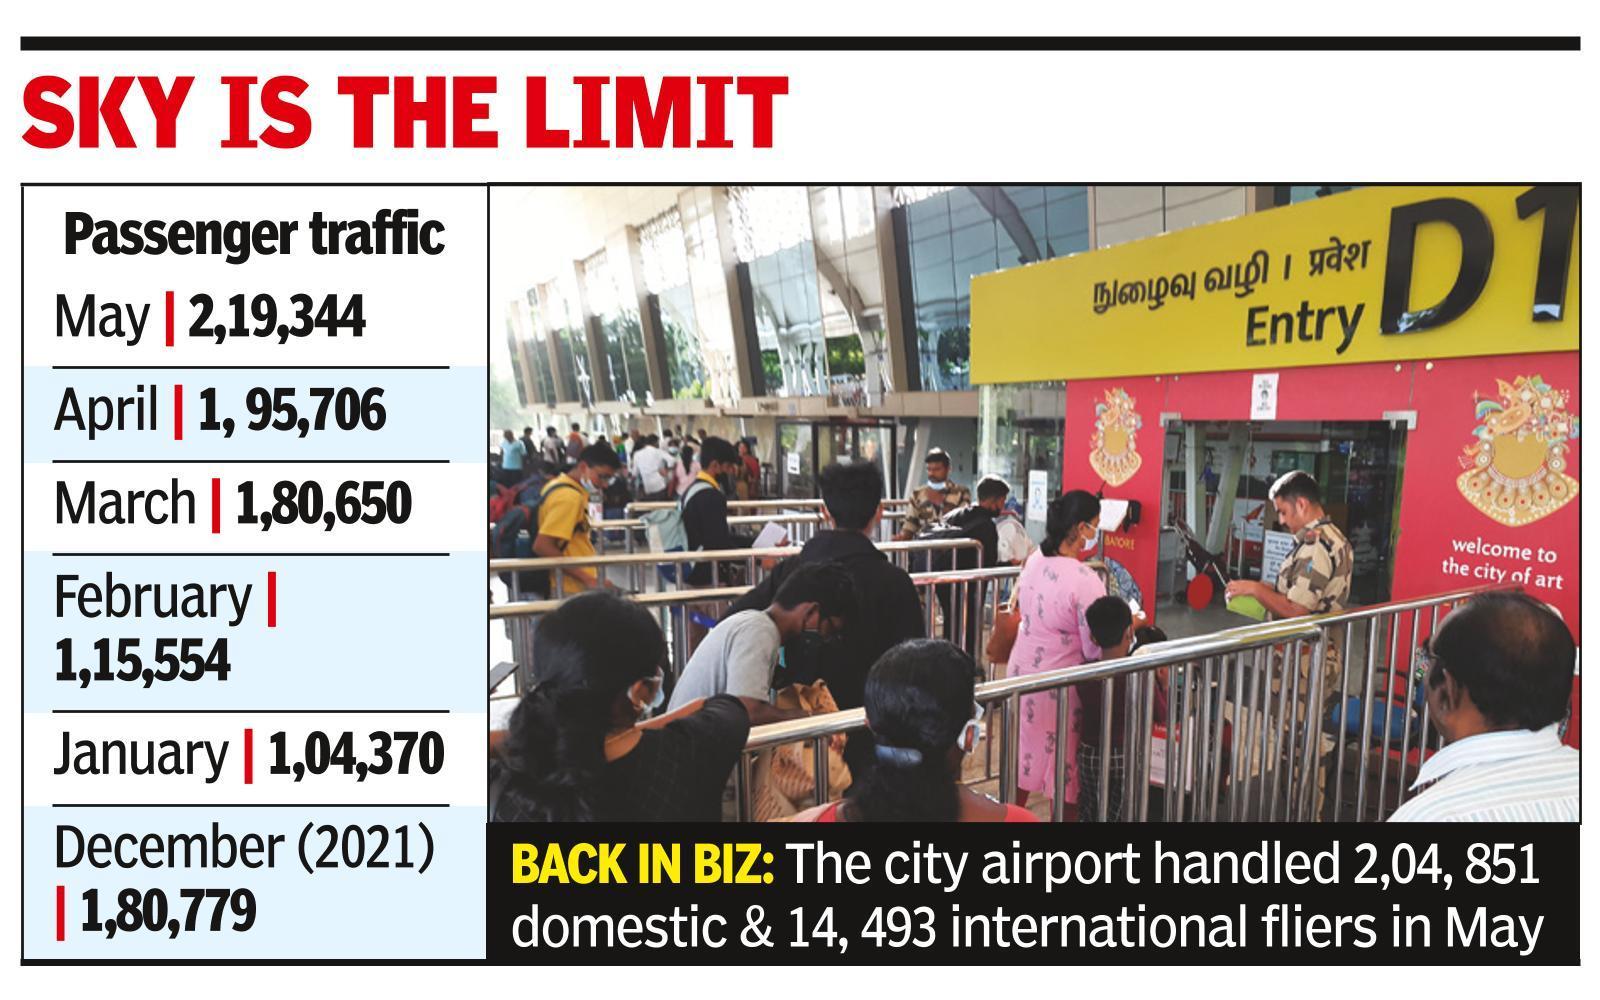 Passenger traffic at airport touches pre-Covid levels